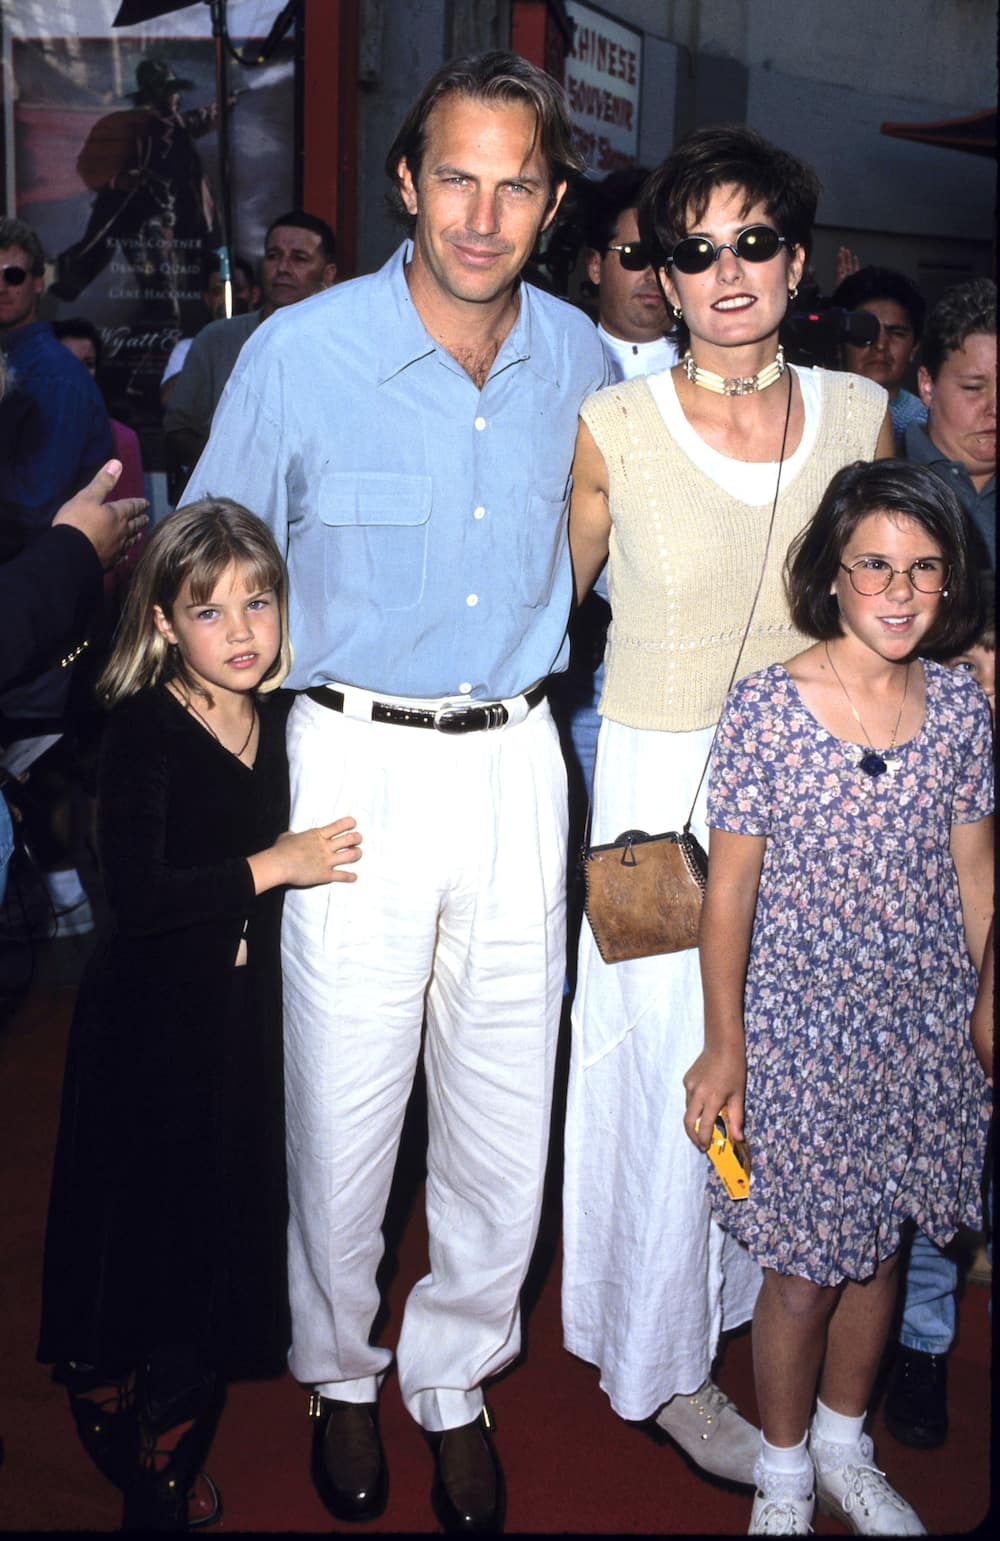 Actor Kevin Costner's family